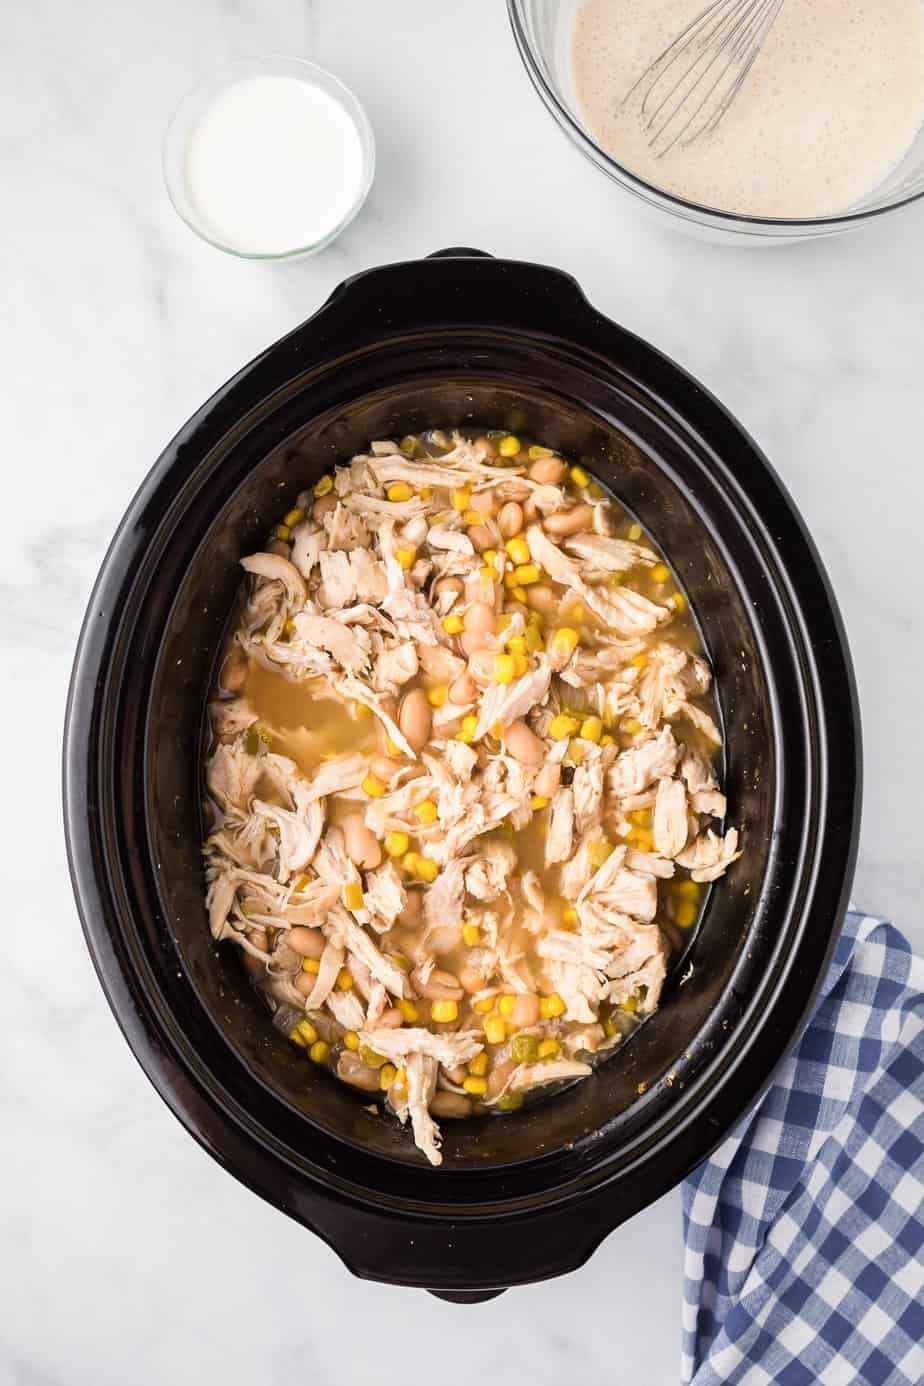 Shredded chicken in a slow cooker from overhead mixed into the soup from overhead with cream and a cream cheese mixture nearby on the counter.